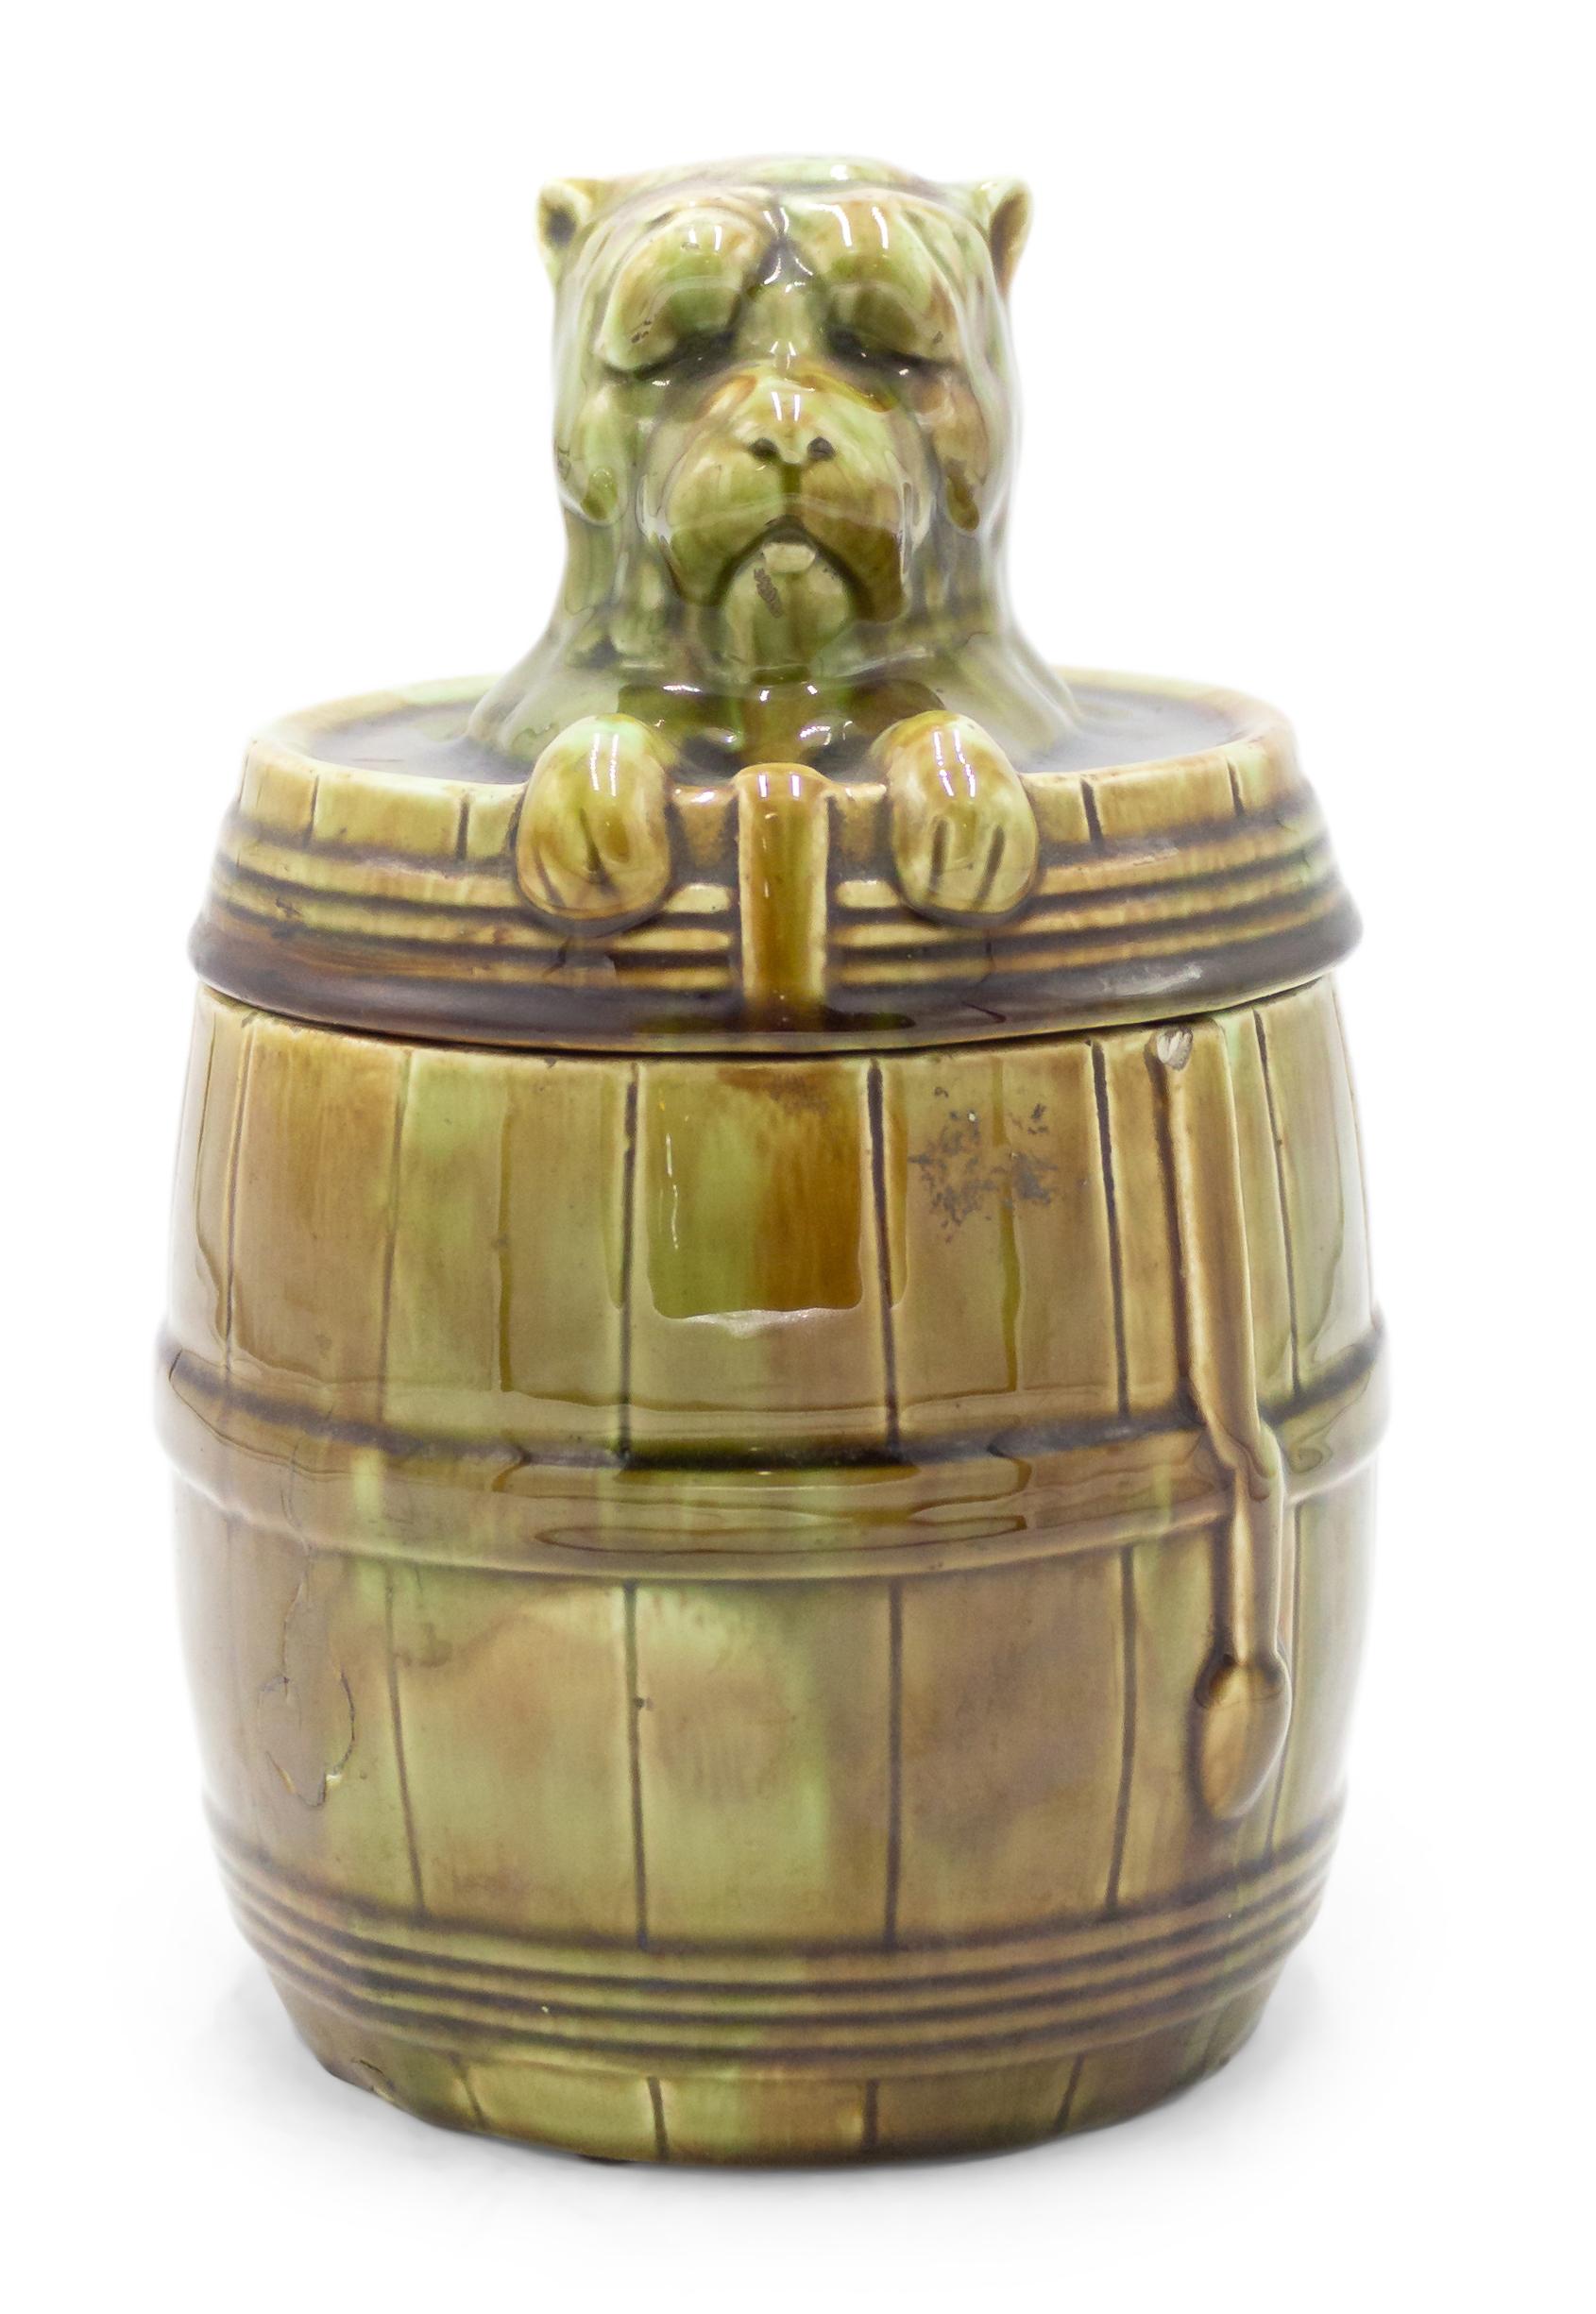 English Victorian green porcelain barrel design box with dog head on top.
 